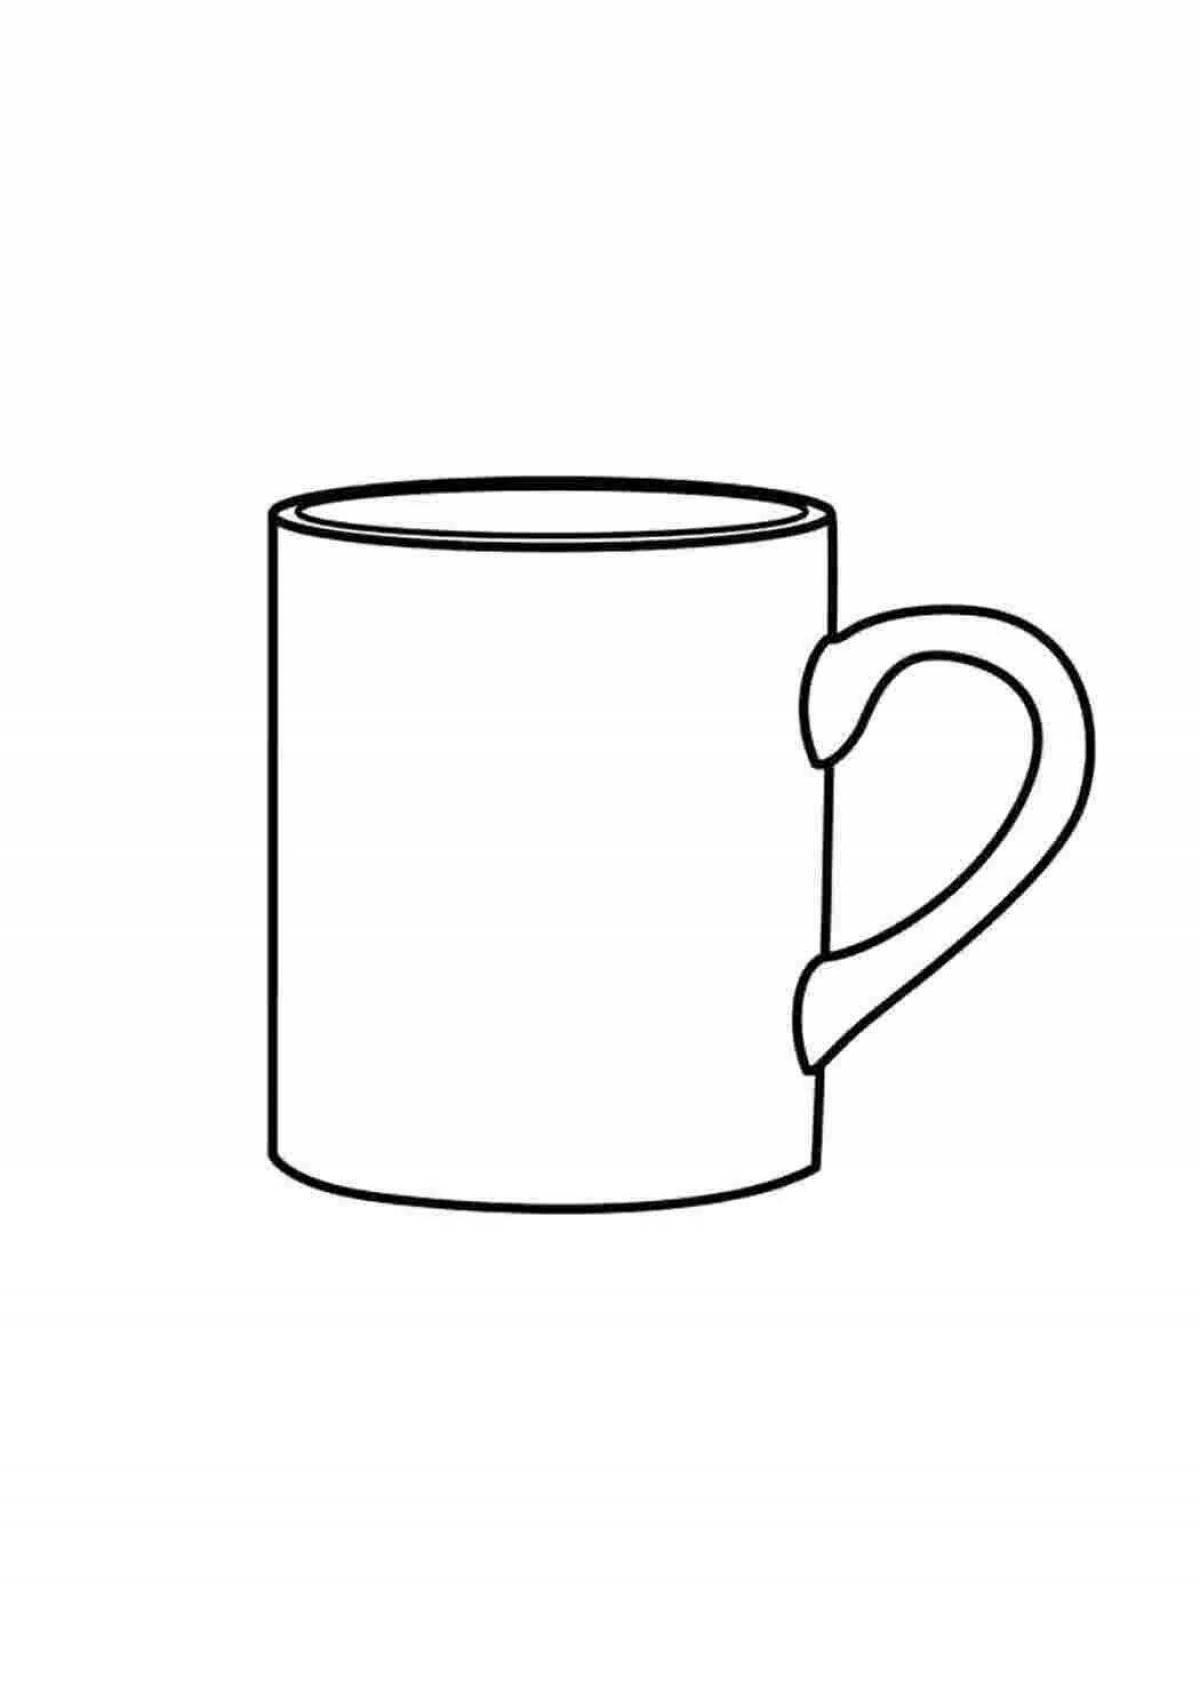 Coloring mug for children 3-4 years old